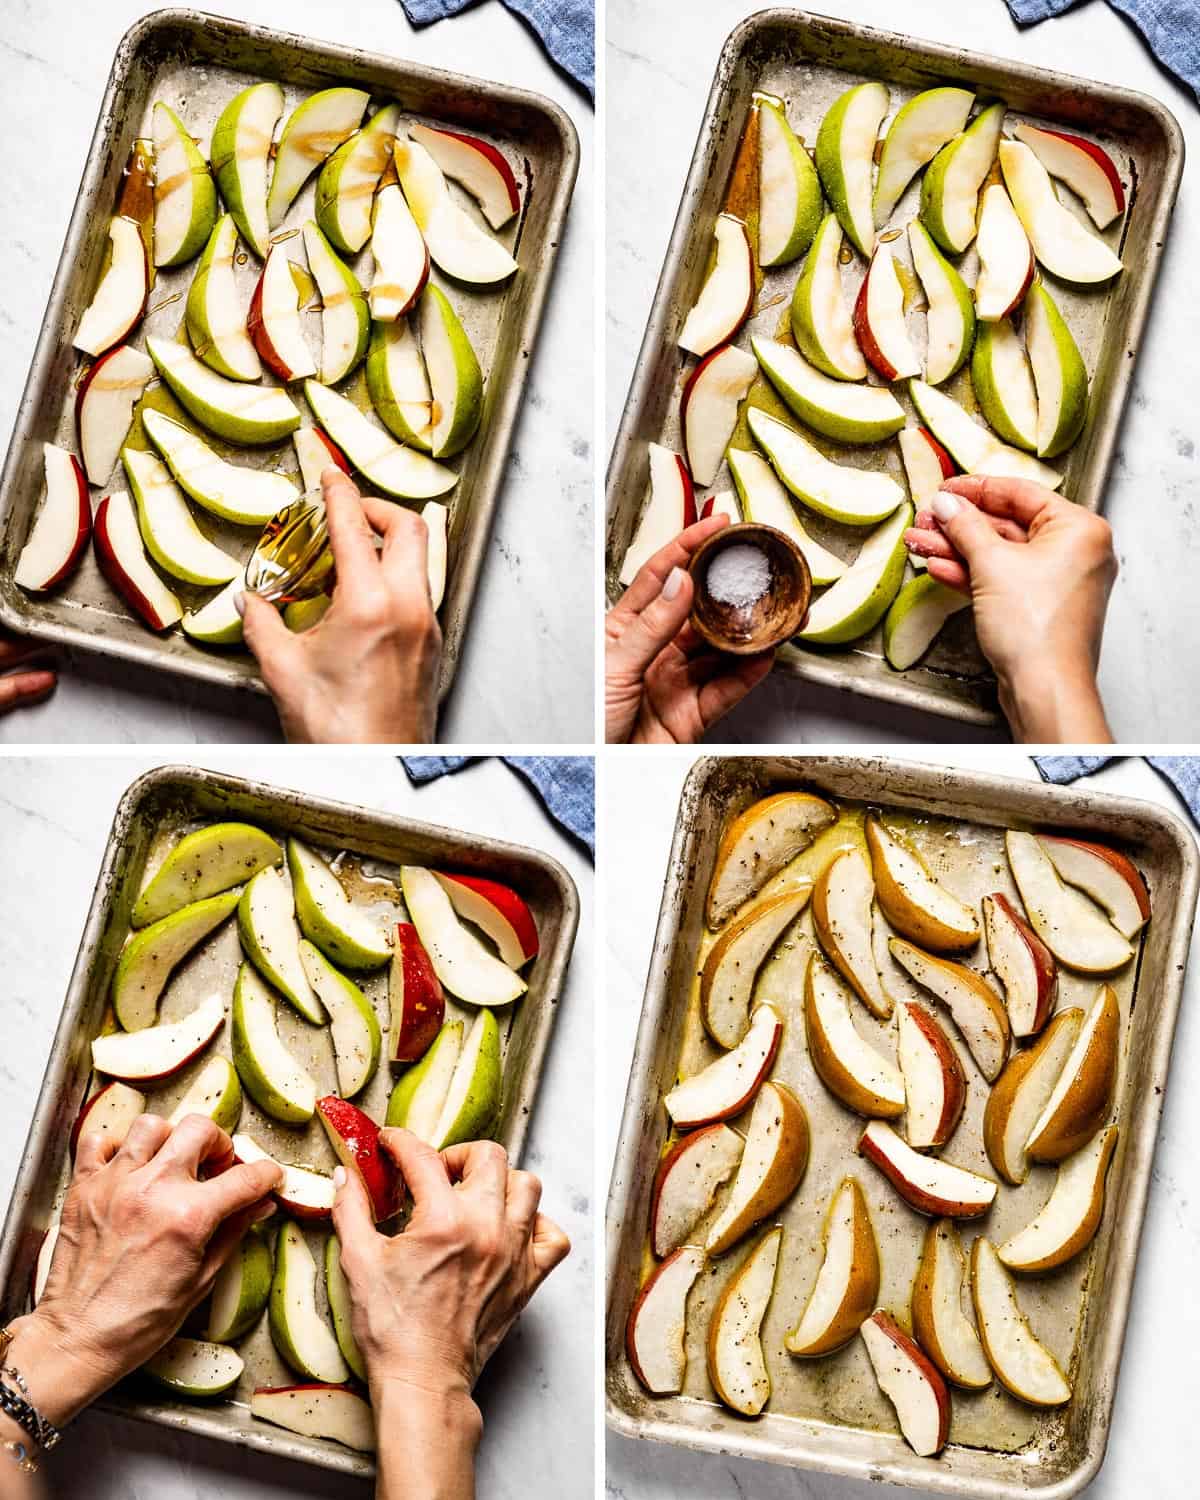 Person showing how to roast pears for salad